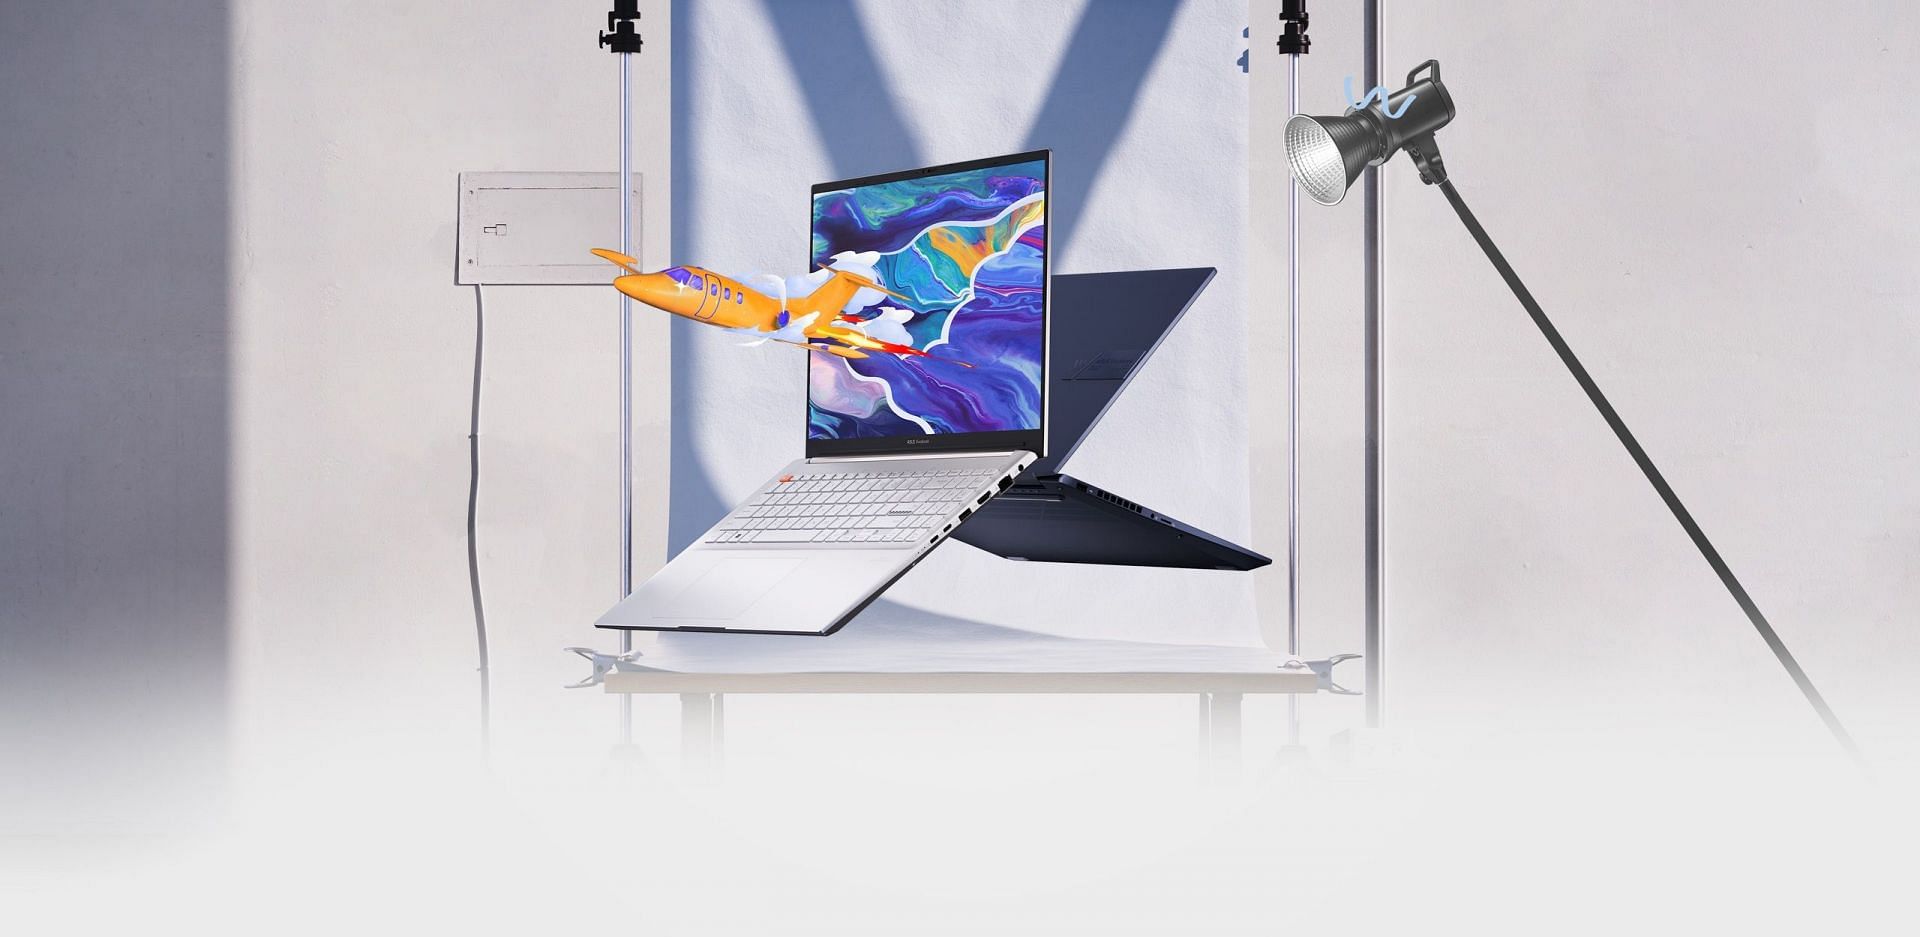 The Asus Vivobook Pro 16X OLED - one of the best lightweight laptops money can buy (Image via Asus)